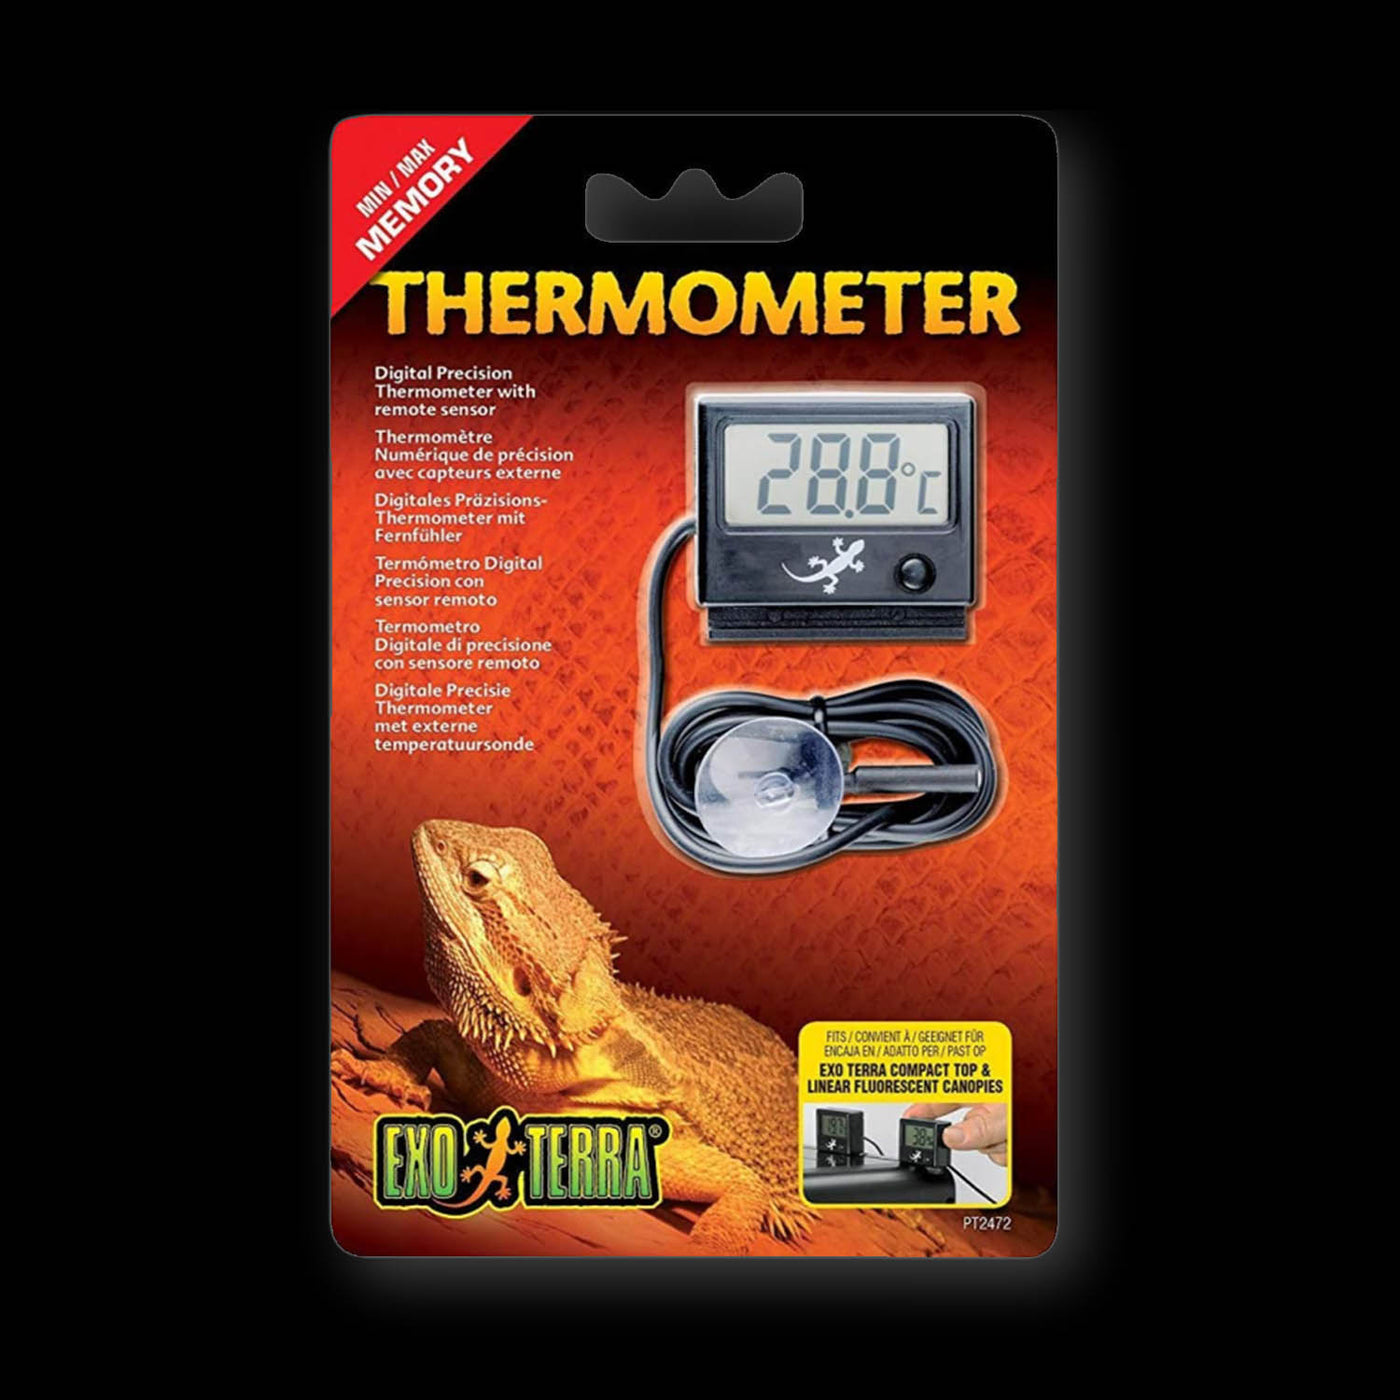 Exo Terra Digital Thermometer with Probe, Celsius and Fahrenheit